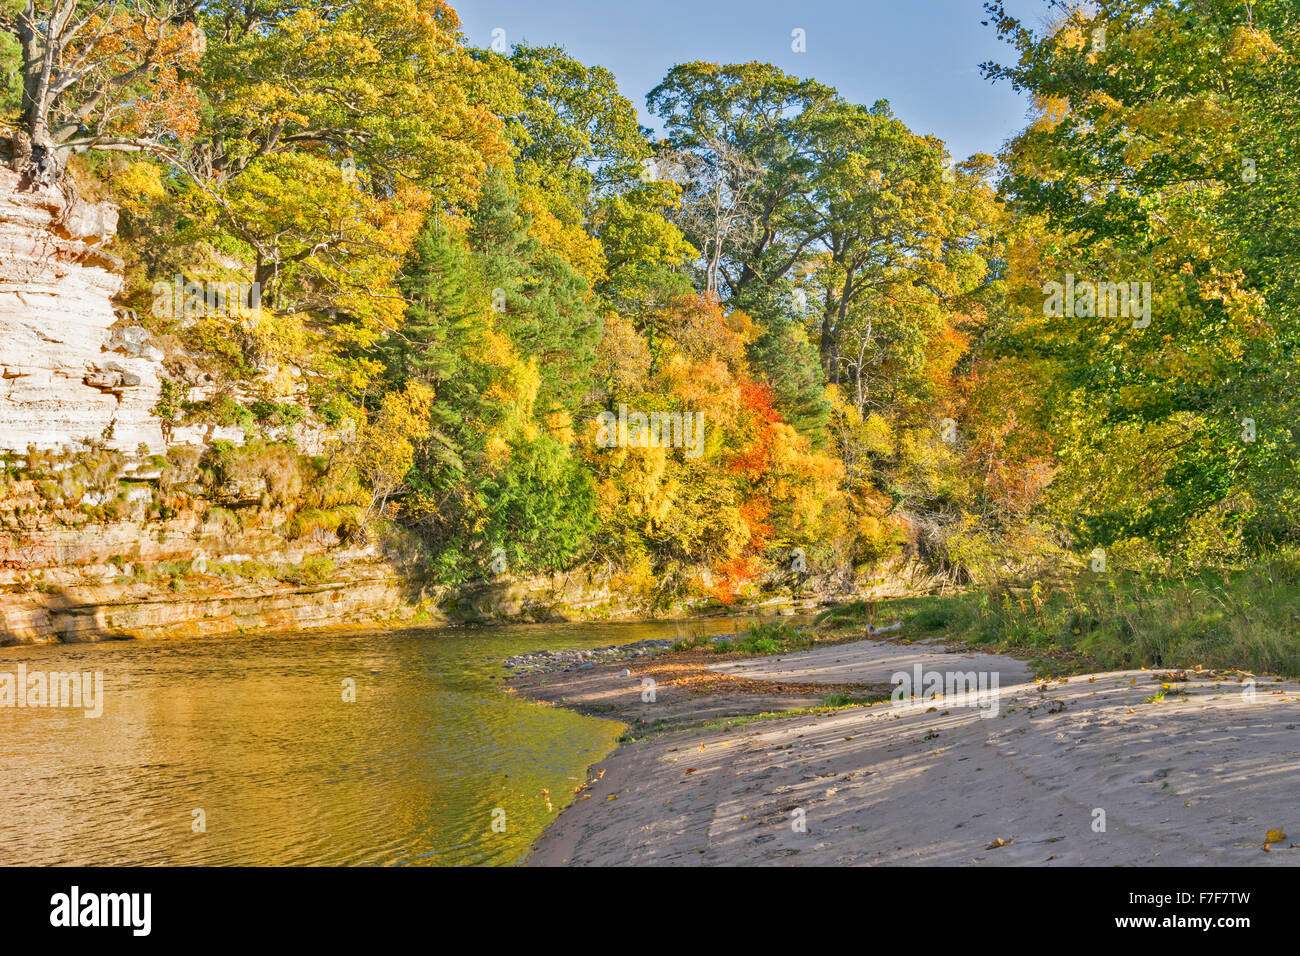 RIVER FINDHORN MORAY SCOTLAND GOLDEN RIVER WITH AUTUMN TREES AND SAND BANK Stock Photo